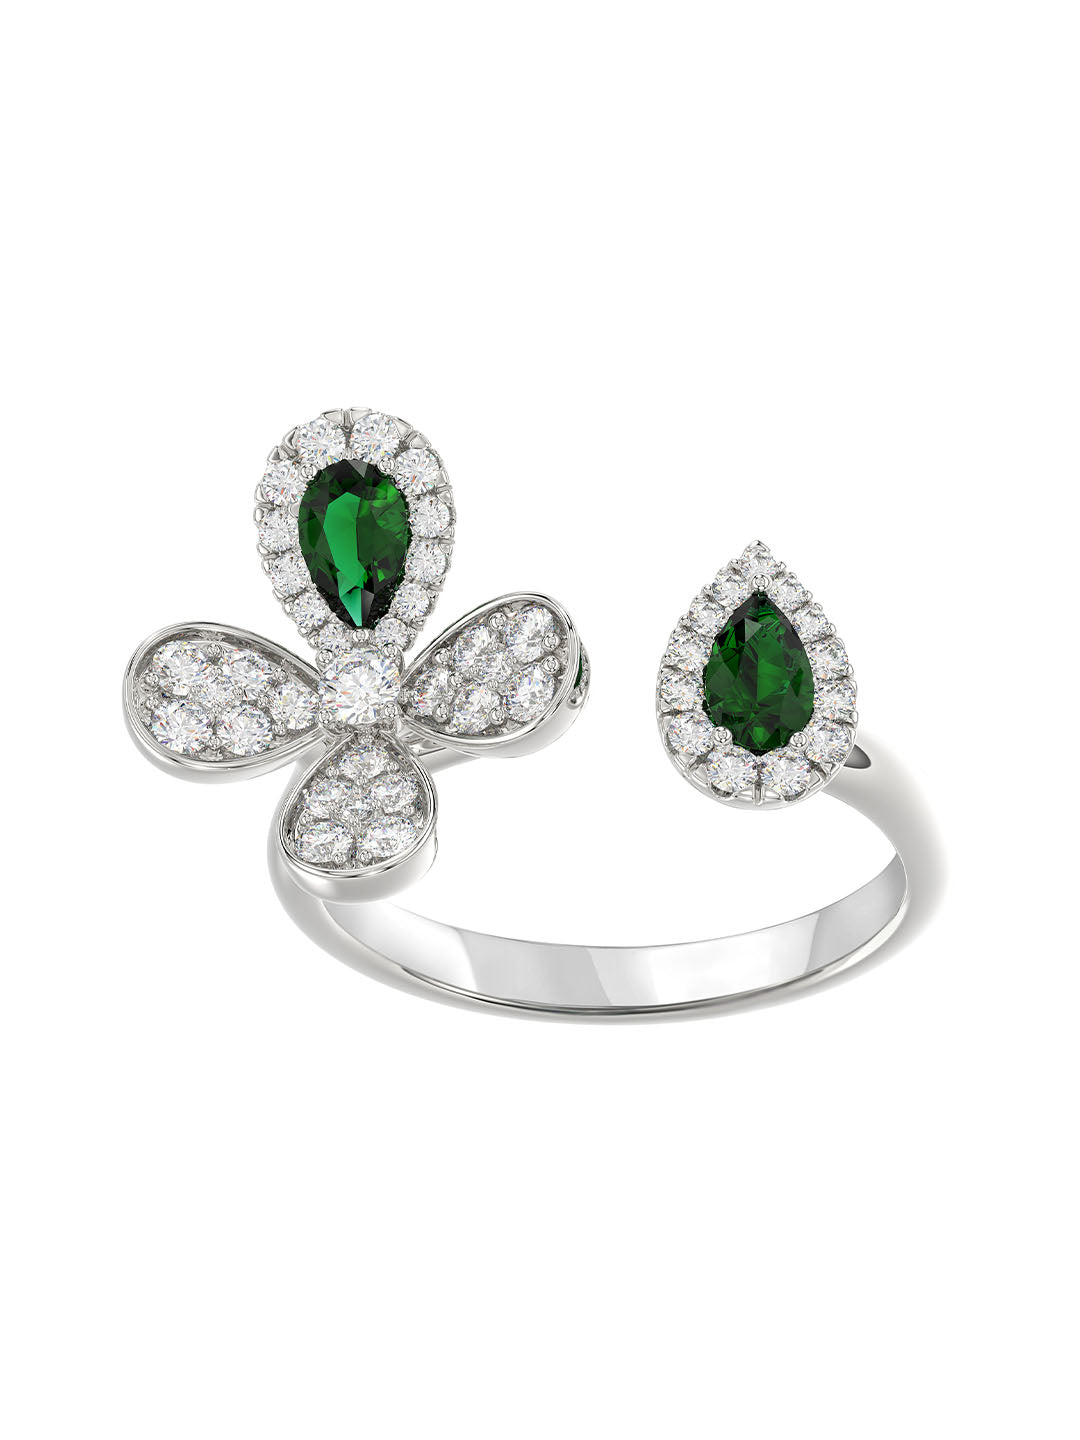 Floral White Gold Ring | Marchesa